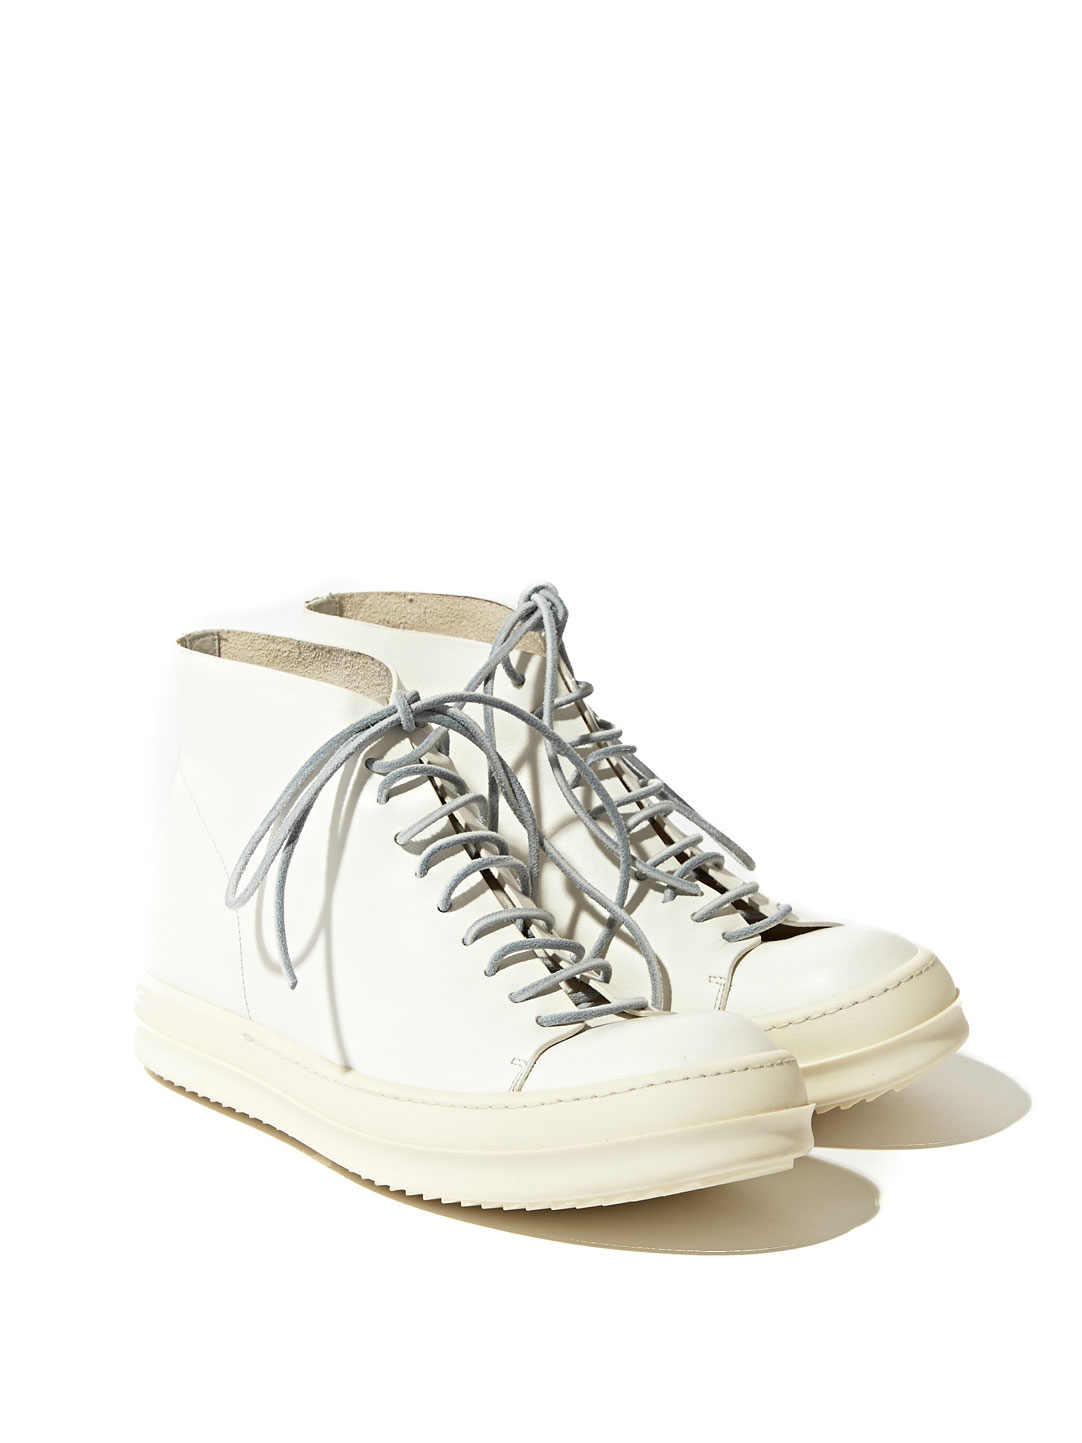 Lyst - Rick Owens Women'S Leather Vicious Dunk Sneakers in White